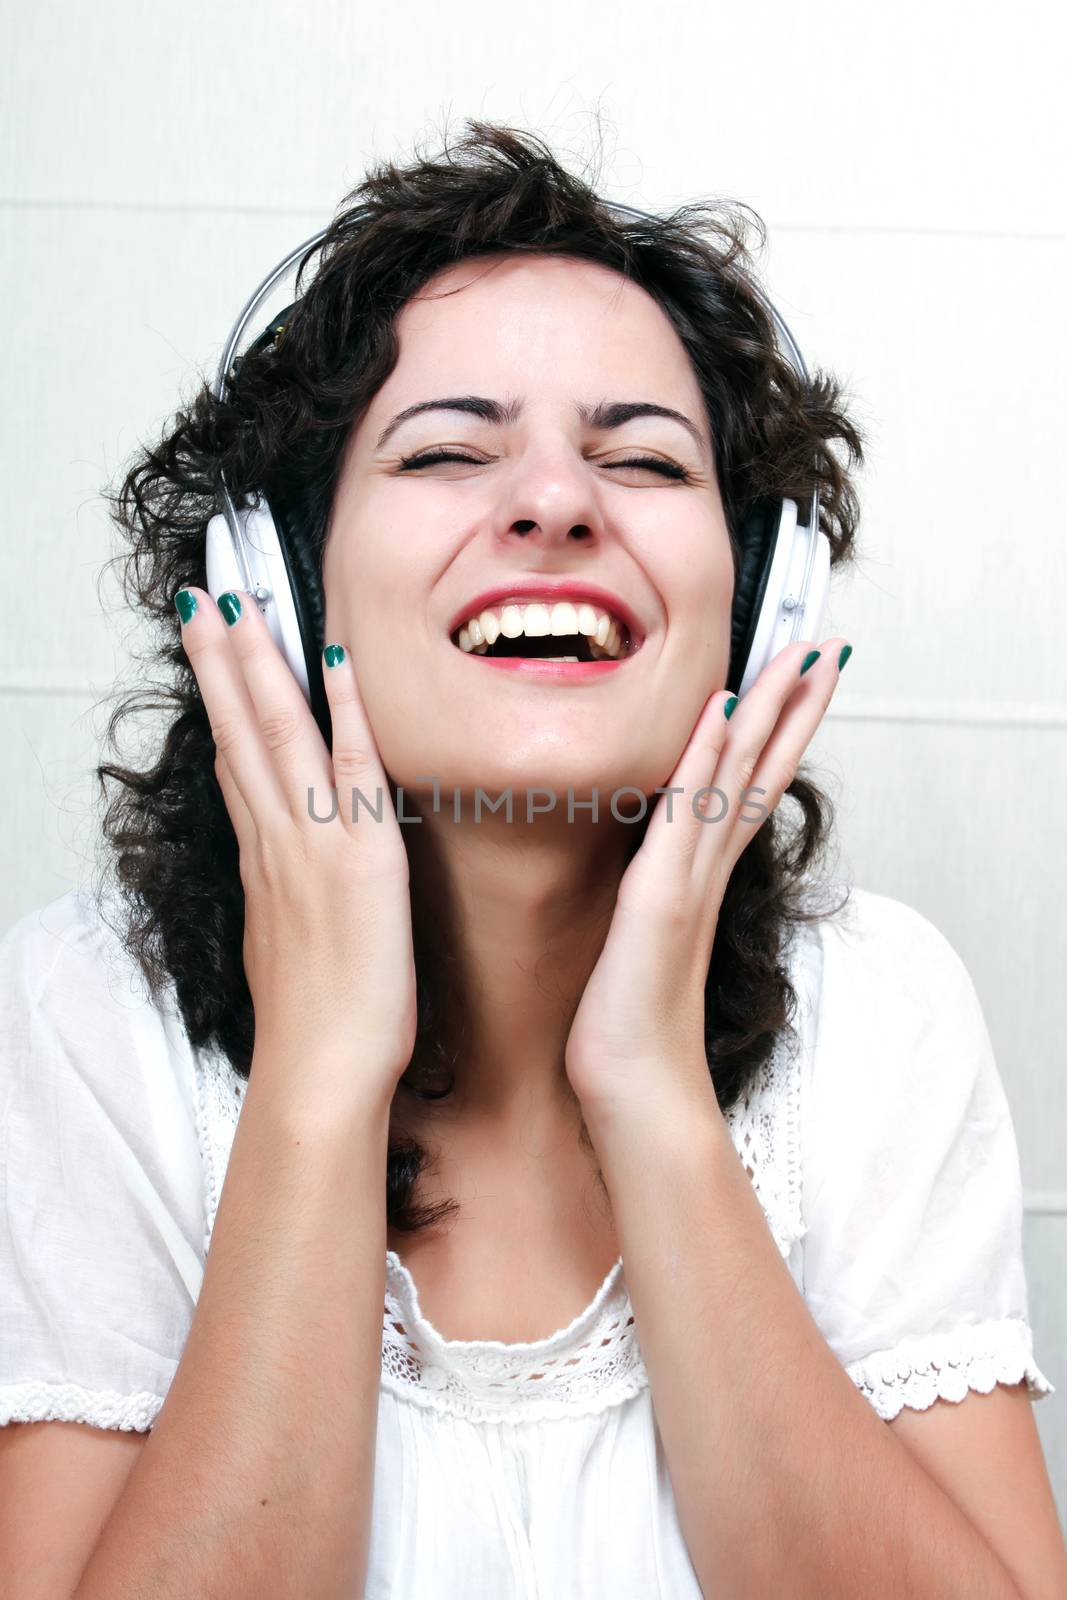 A young woman listening music with Headphones.